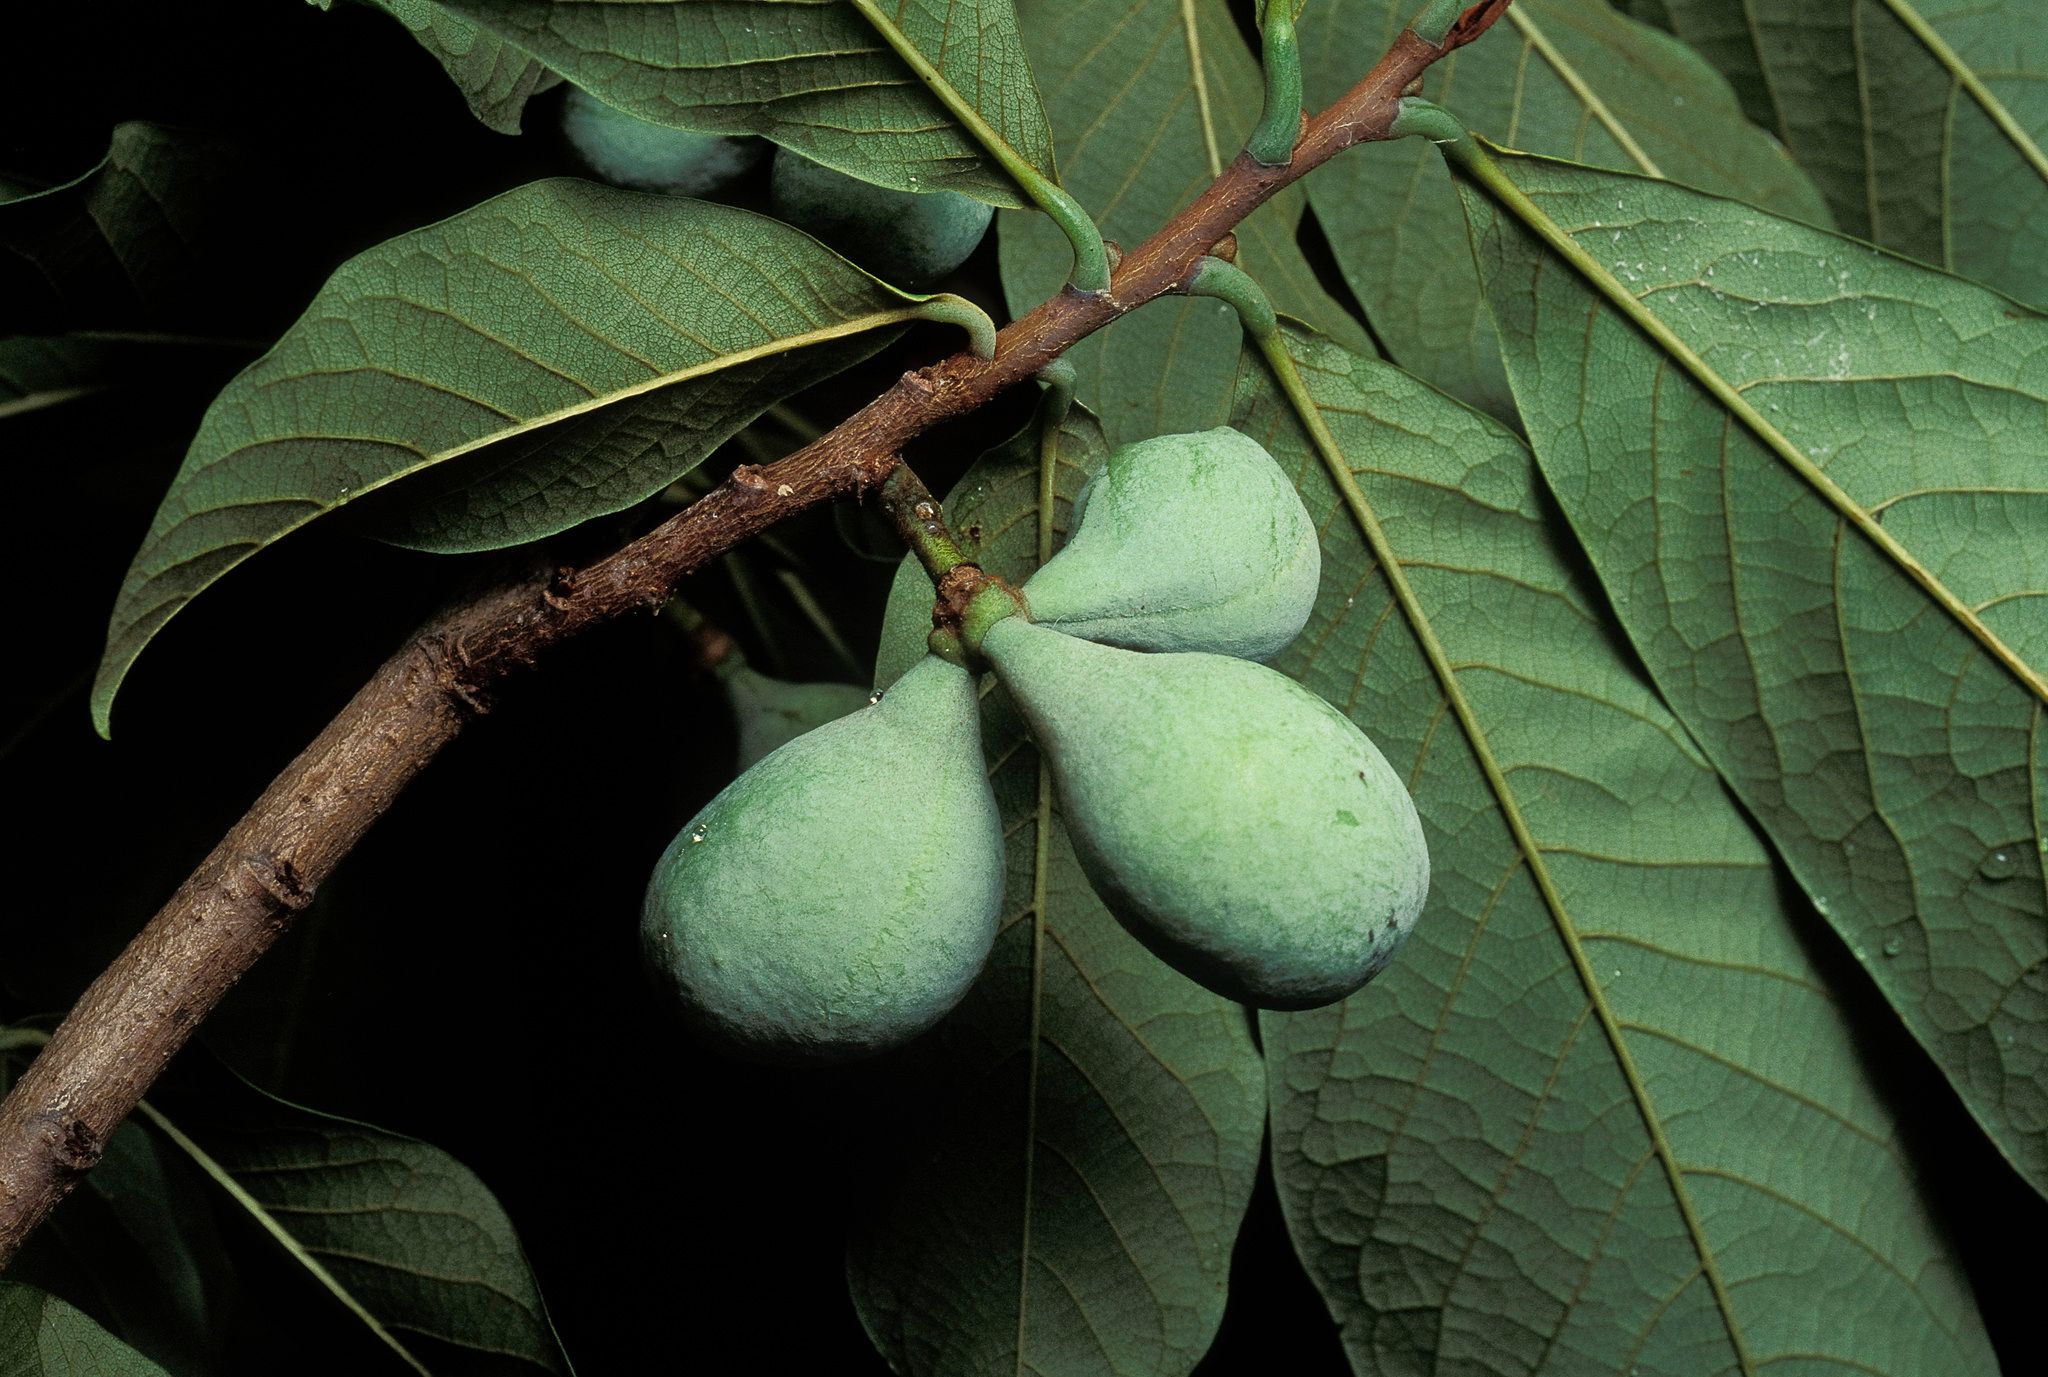 Pawpaws hanging on the tree